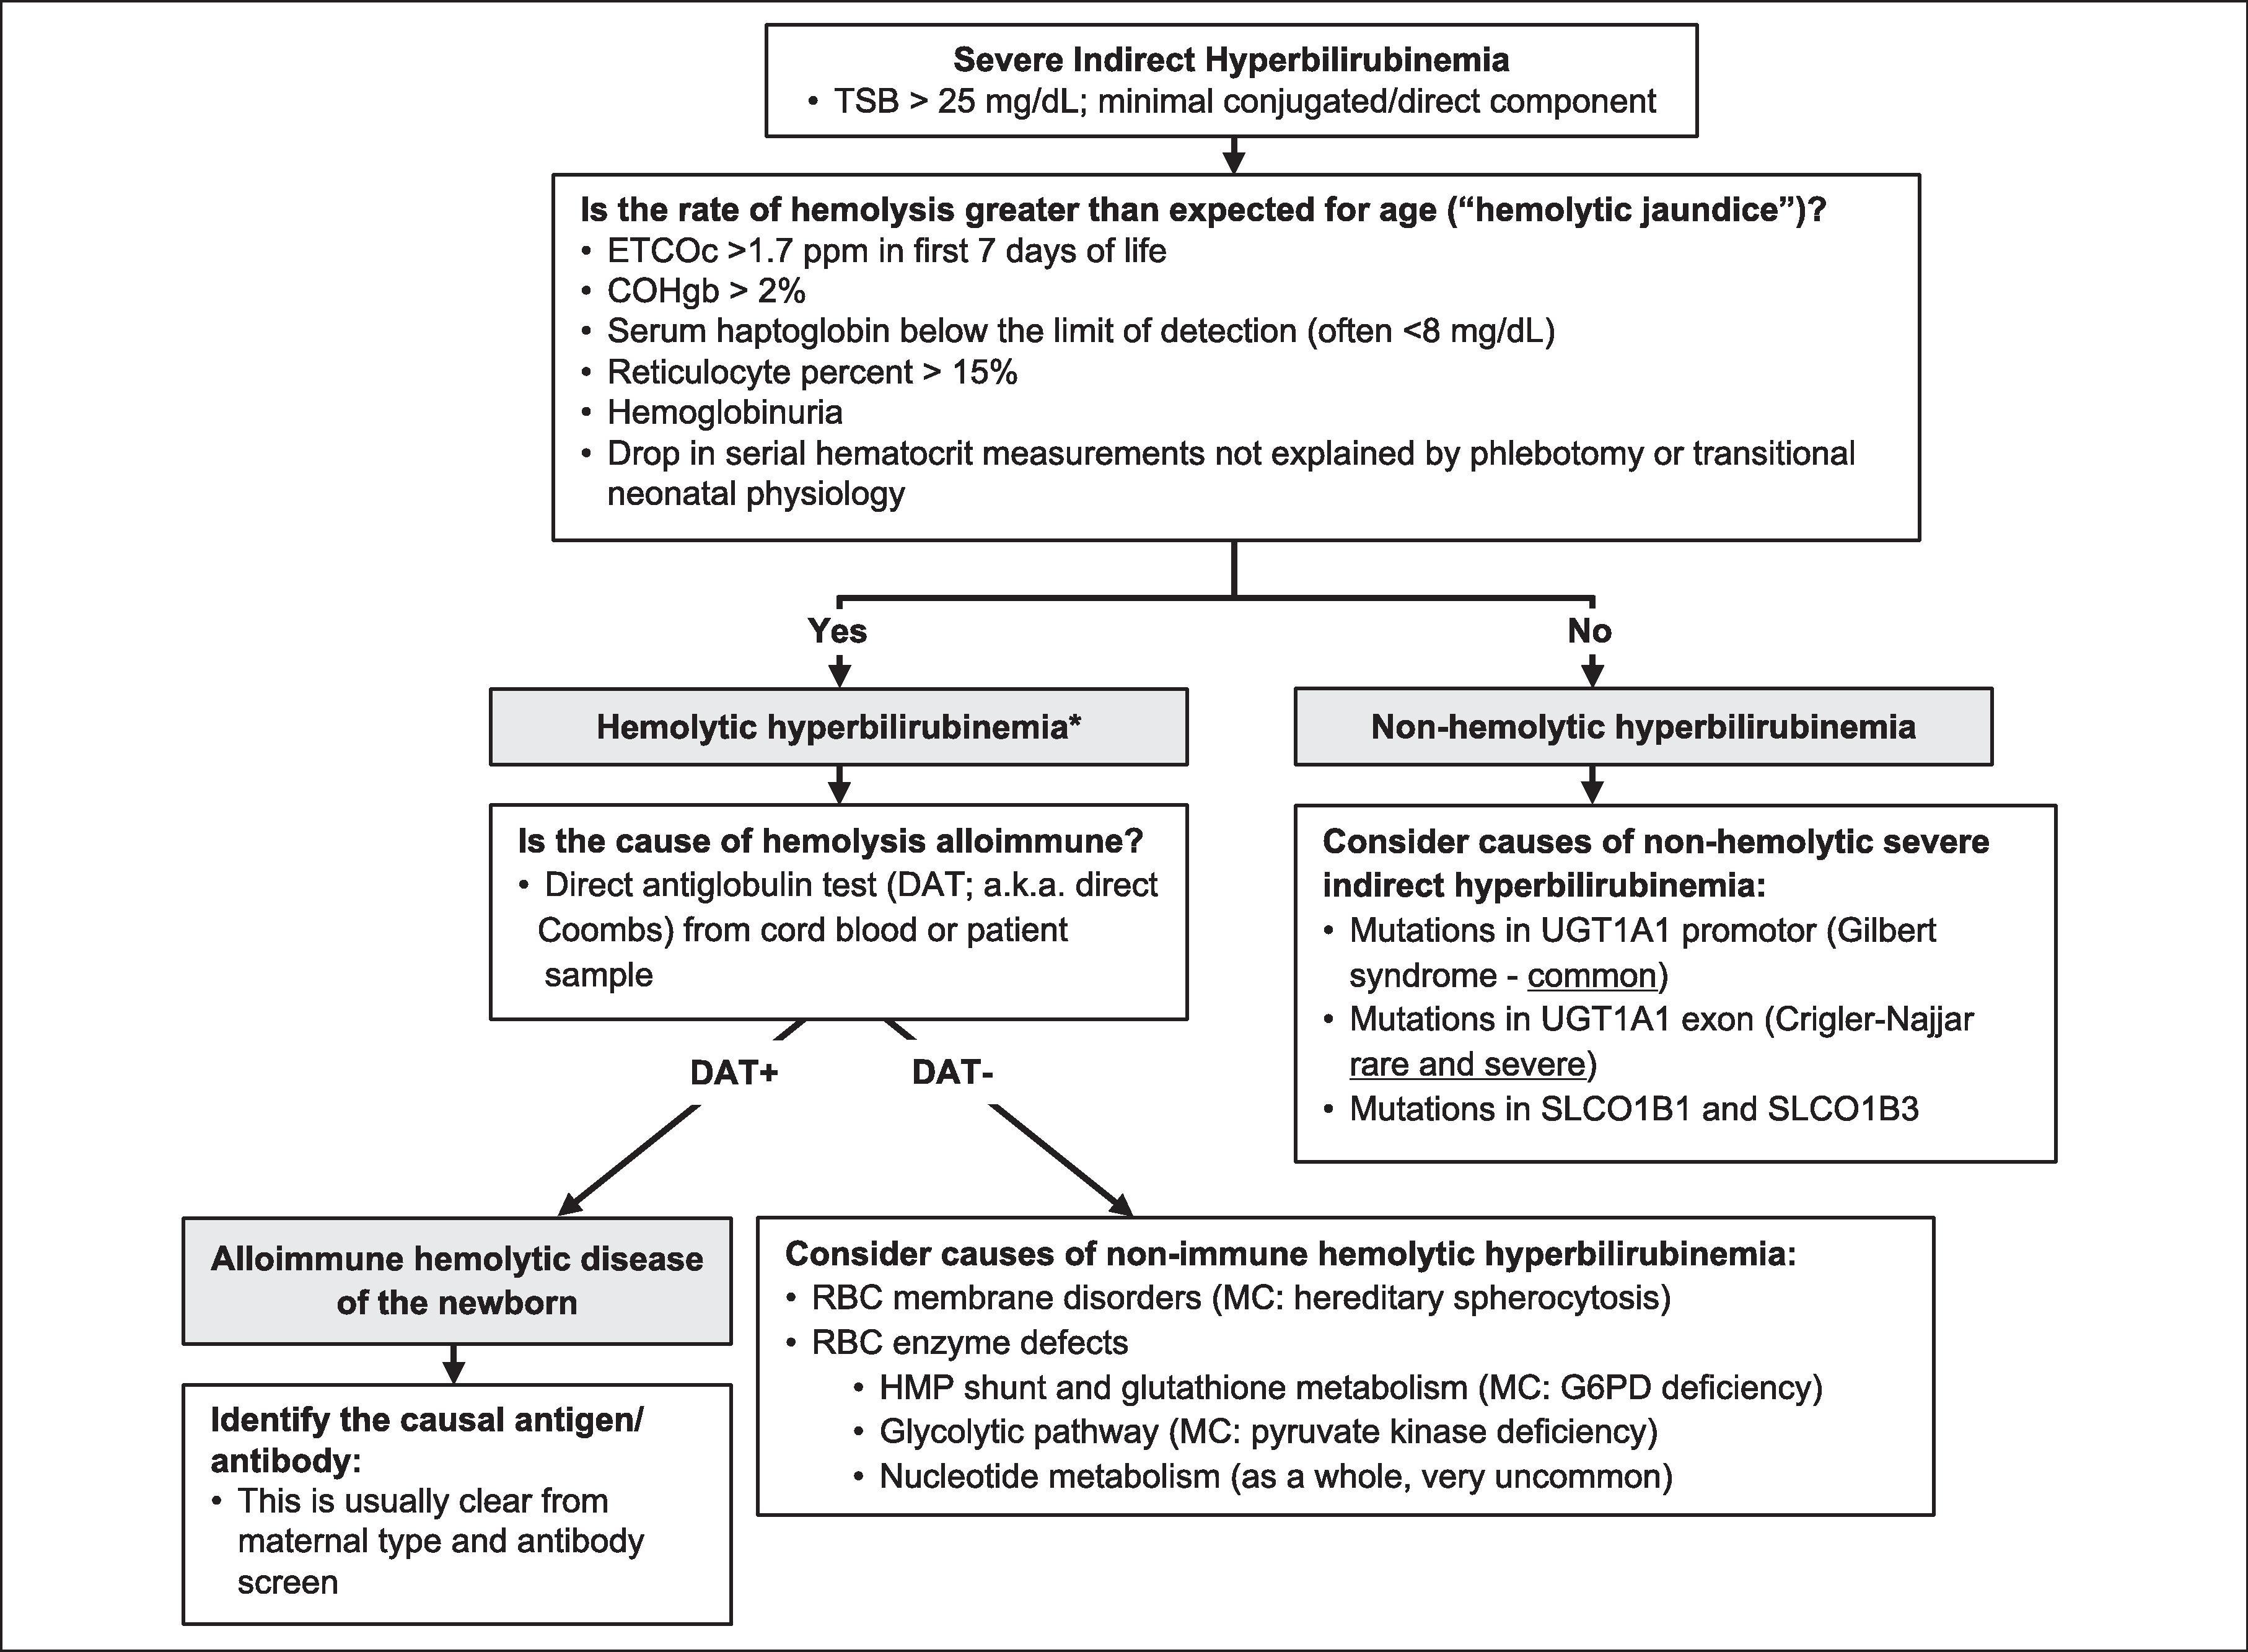 Fig. 42.2, Approach for Diagnostic Evaluation of Neonatal Hyperbilirubinemia.